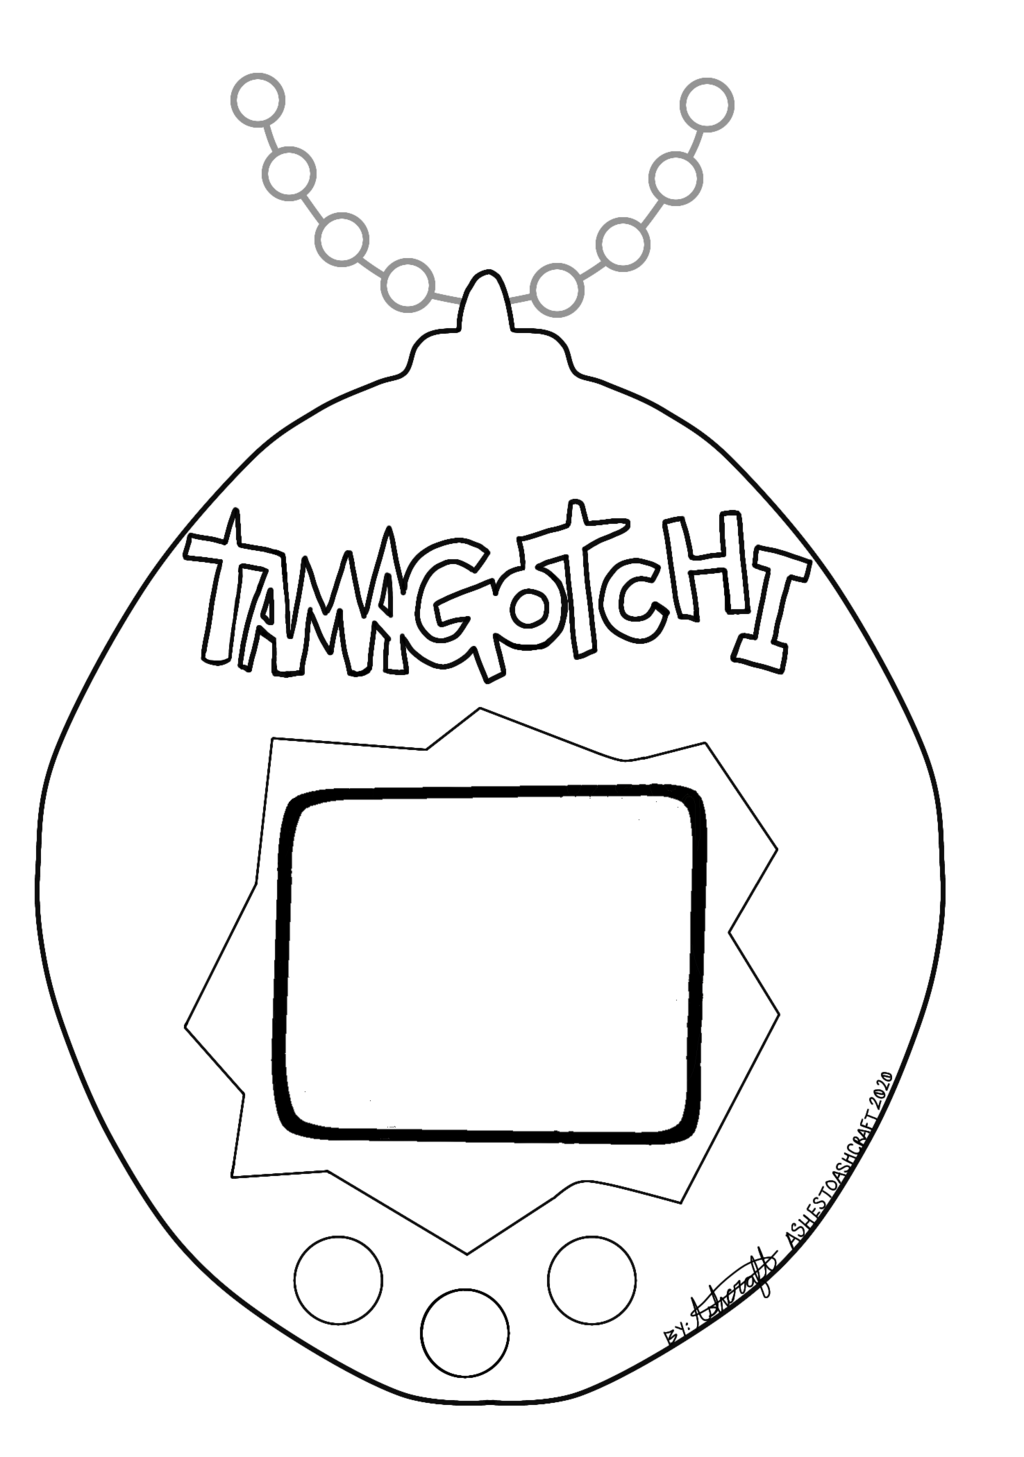 Tamagotchi [Free to Use Coloring Page]